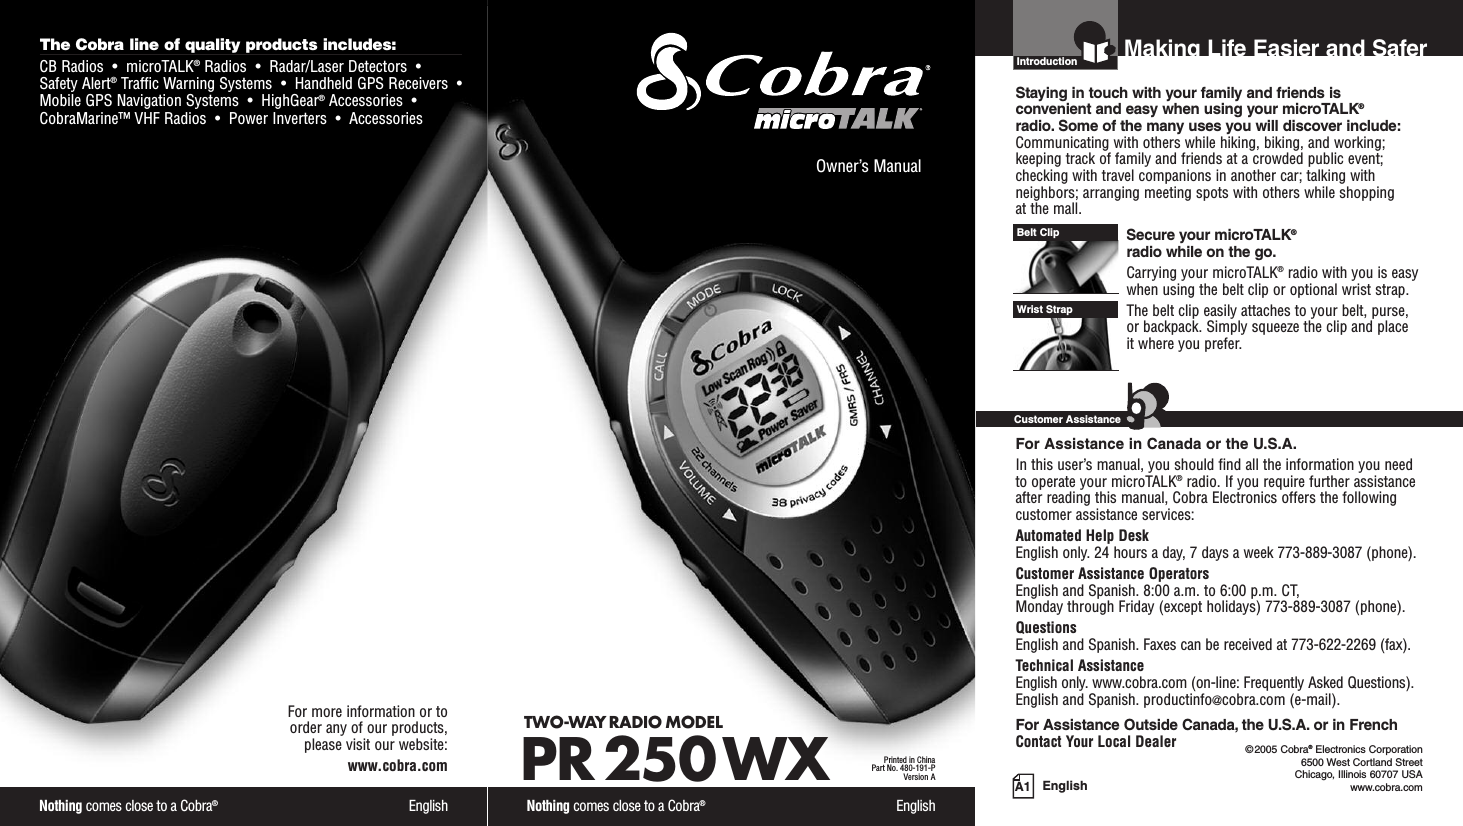 Owner’s ManualNothing comes close to a Cobra®EnglishTWO-WAY RADIO MODEL PR 250 WXPrinted in ChinaPart No. 480-191-PVersion A EnglishIntro Operation CustomerAssistanceWarrantyNoticeMain IconsSecondary IconsIntroduction©2005 Cobra®Electronics Corporation6500 West Cortland StreetChicago, Illinois 60707 USAwww.cobra.comMaking Life Easier and SaferStaying in touch with your family and friends is convenient and easy when using your microTALK®radio. Some of the many uses you will discover include:Communicating with others while hiking, biking, and working;keeping track of family and friends at a crowded public event;checking with travel companions in another car; talking withneighbors; arranging meeting spots with others while shopping at the mall.Secure your microTALK®radio while on the go.Carrying your microTALK®radio with you is easywhen using the belt clip or optional wrist strap. The belt clip easily attaches to your belt, purse, or backpack. Simply squeeze the clip and place it where you prefer.For Assistance in Canada or the U.S.A.In this user’s manual, you should find all the information you needto operate your microTALK®radio. If you require further assistanceafter reading this manual, Cobra Electronics offers the followingcustomer assistance services:Automated Help Desk English only. 24 hours a day, 7 days a week 773-889-3087 (phone). Customer Assistance OperatorsEnglish and Spanish. 8:00 a.m. to 6:00 p.m. CT, Monday through Friday (except holidays) 773-889-3087 (phone). QuestionsEnglish and Spanish. Faxes can be received at 773-622-2269 (fax). Technical AssistanceEnglish only. www.cobra.com (on-line: Frequently Asked Questions). English and Spanish. productinfo@cobra.com (e-mail).For Assistance Outside Canada, the U.S.A. or in FrenchContact Your Local DealerBelt ClipWrist StrapIntro Operation CustomerAssistanceWarrantyNoticeMain IconsSecondary IconsCustomer AssistanceA1The Cobra line of quality products includes:CB Radios  •  microTALK®Radios  •  Radar/Laser Detectors  •Safety Alert®Traffic Warning Systems  •  Handheld GPS Receivers  •Mobile GPS Navigation Systems  •  HighGear®Accessories  •CobraMarine™ VHF Radios  •  Power Inverters  •  AccessoriesNothing comes close to a Cobra®EnglishFor more information or to order any of our products, please visit our website:www.cobra.com      